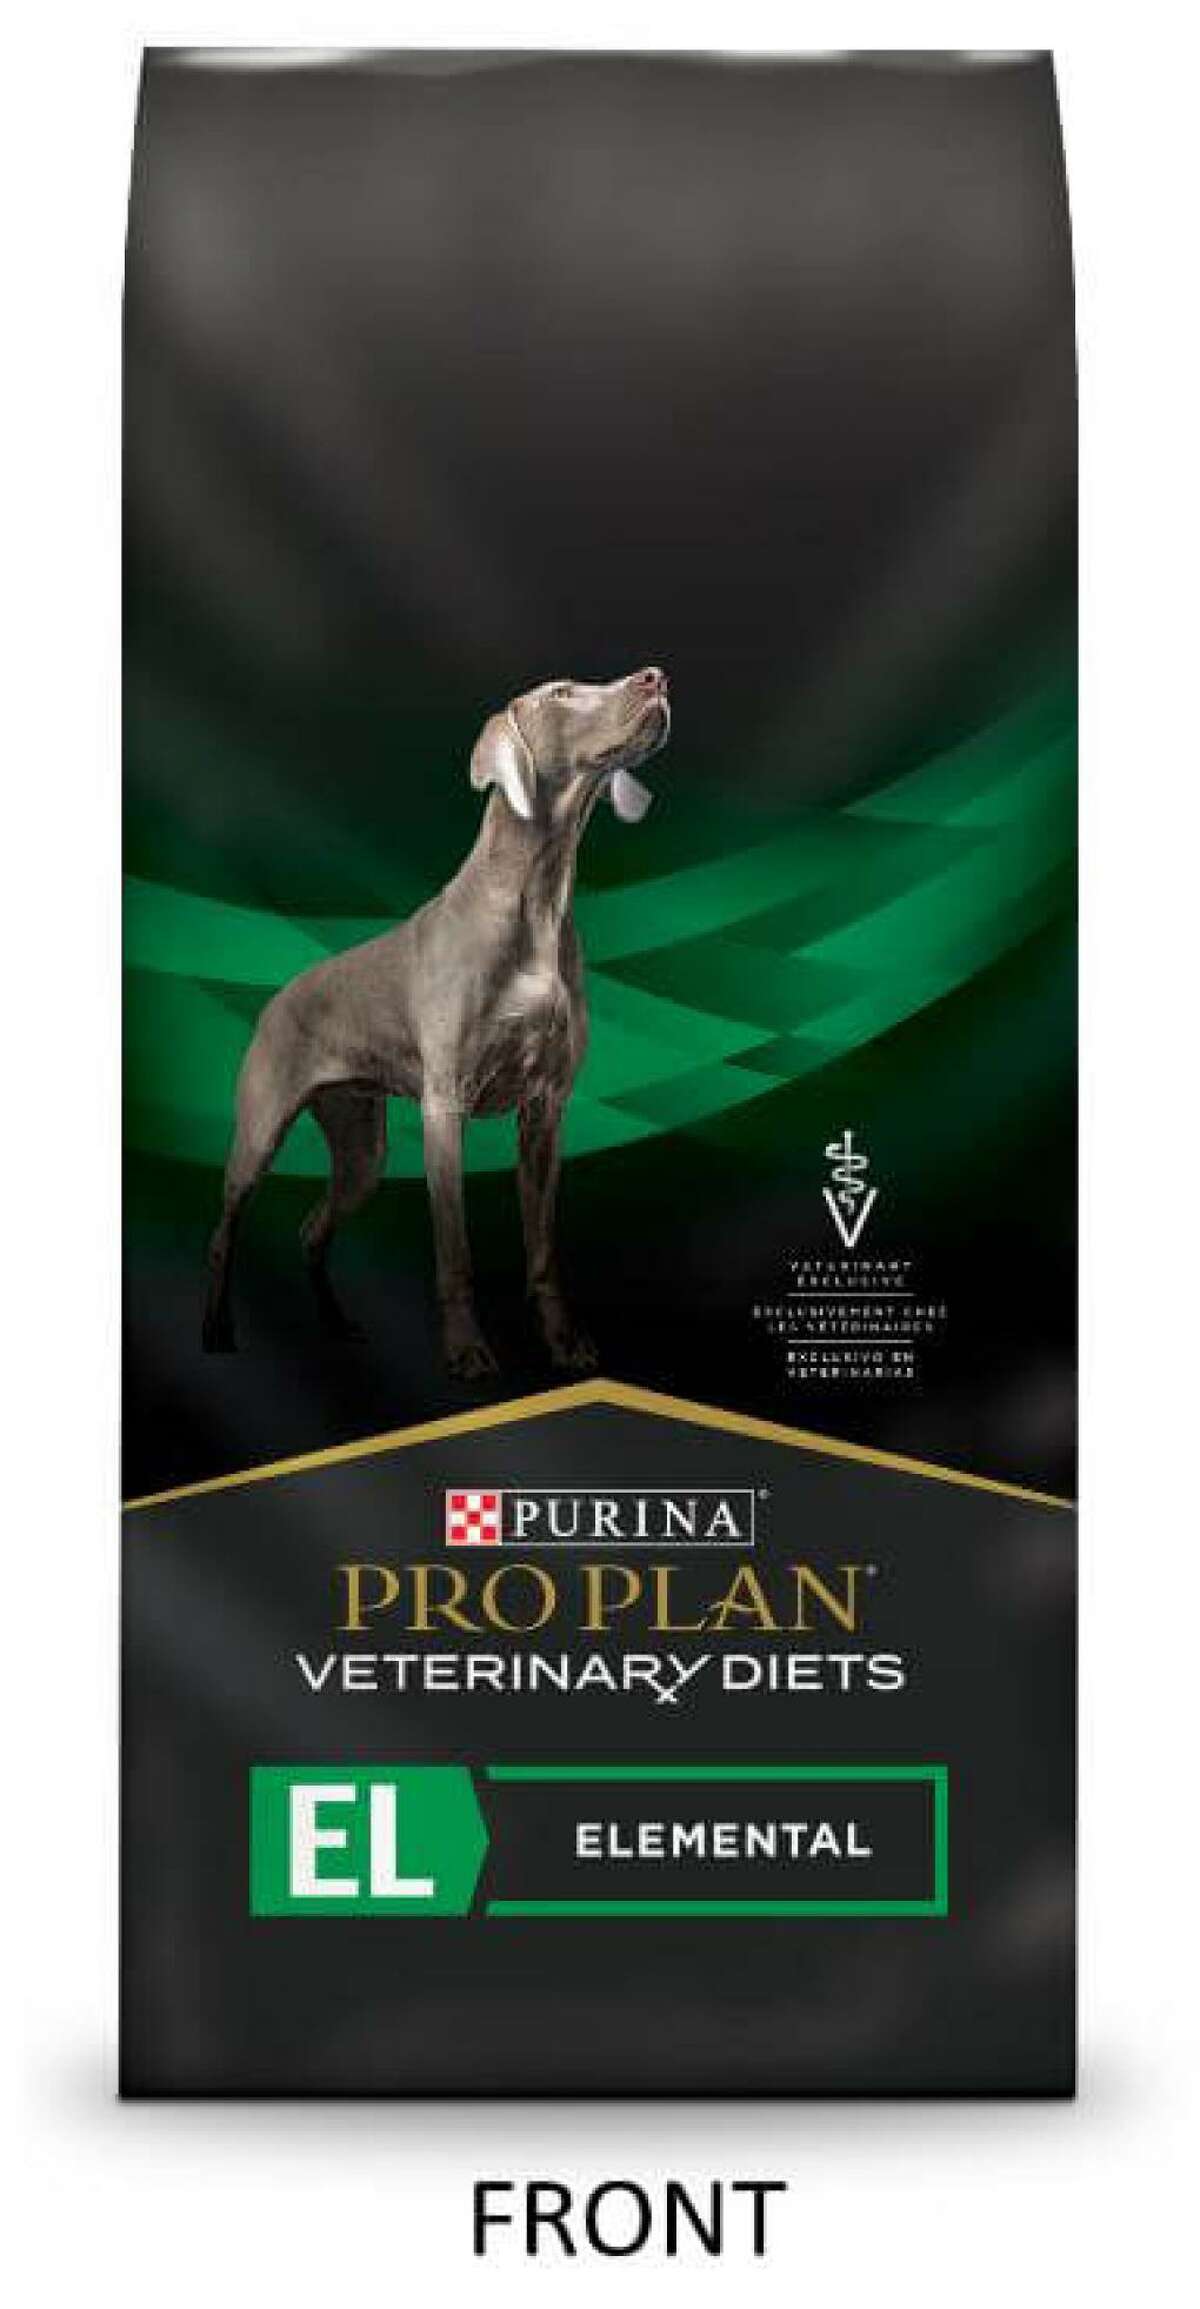 Purina Pro Plan Veterinary Diets Elemental has been recalled over possible elevated vitamin D issues.